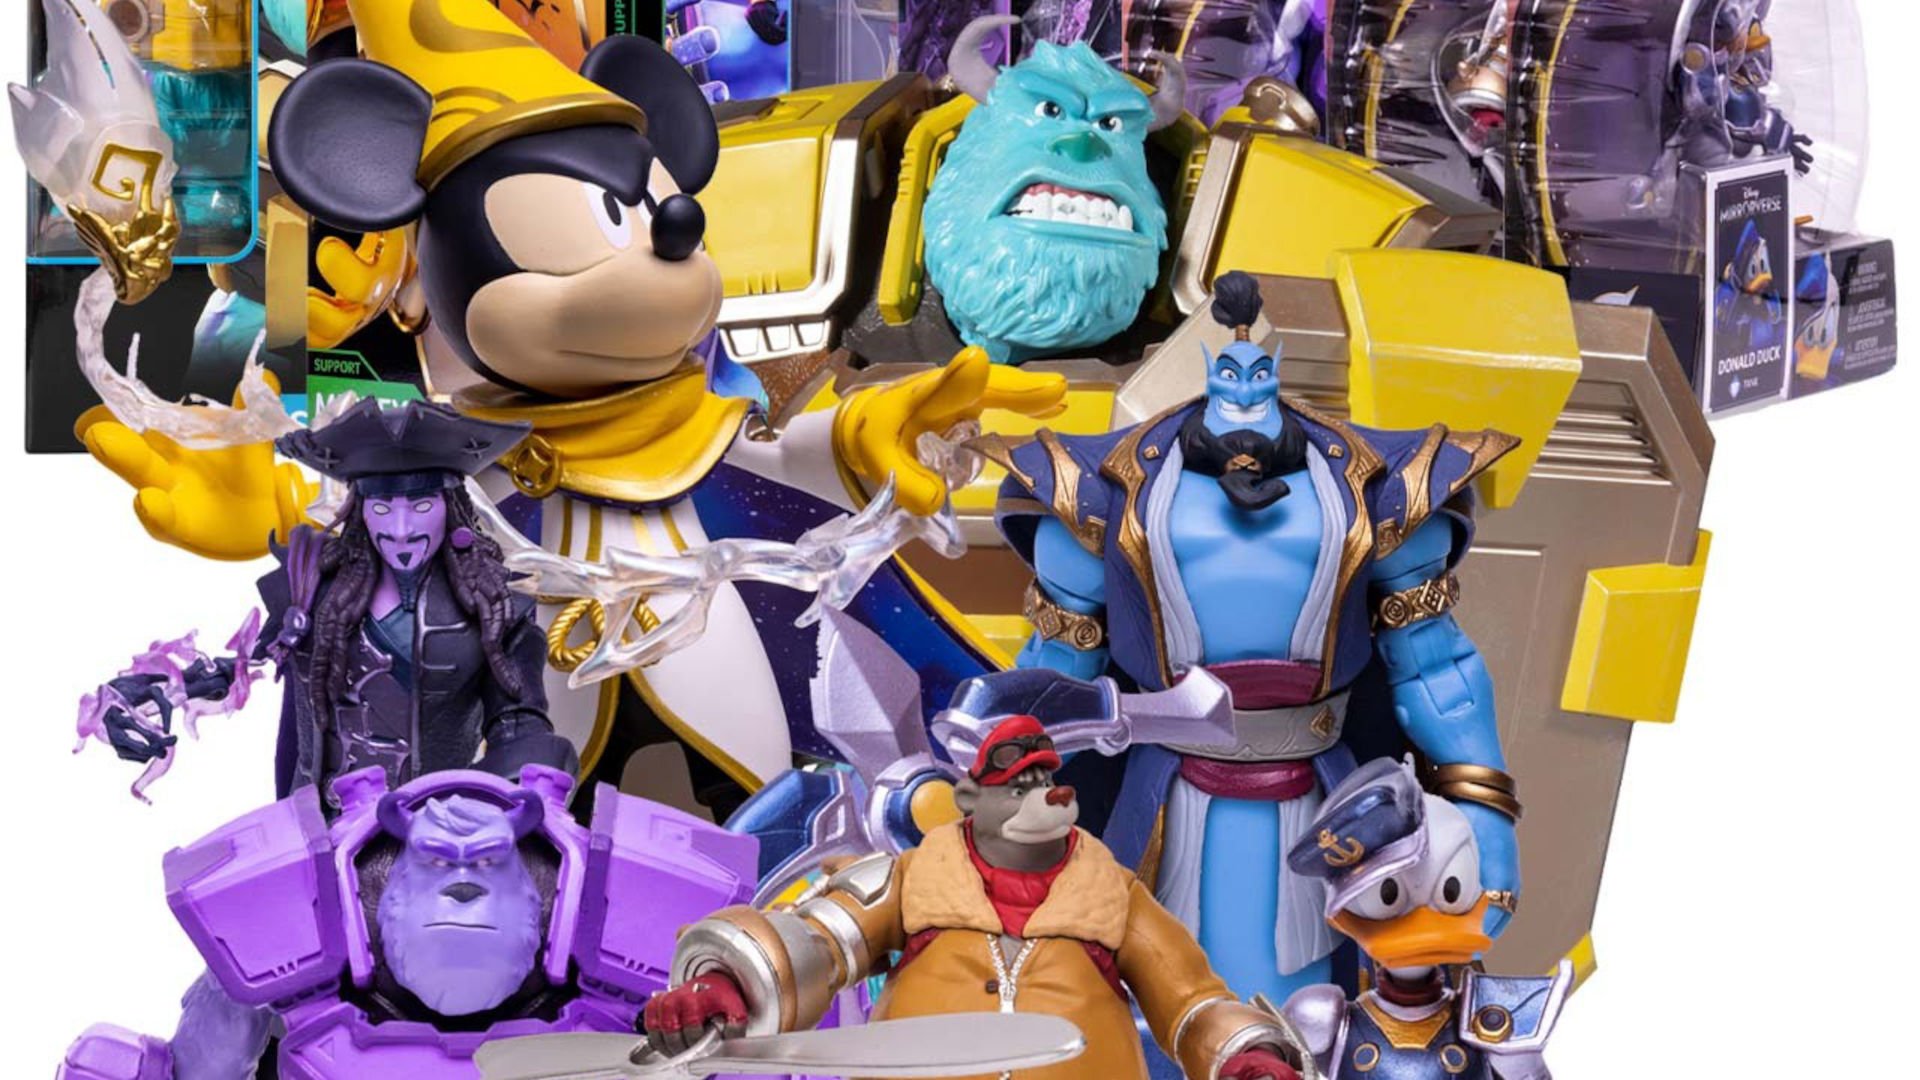 Disney Mirrorverse toys that you can order right now.